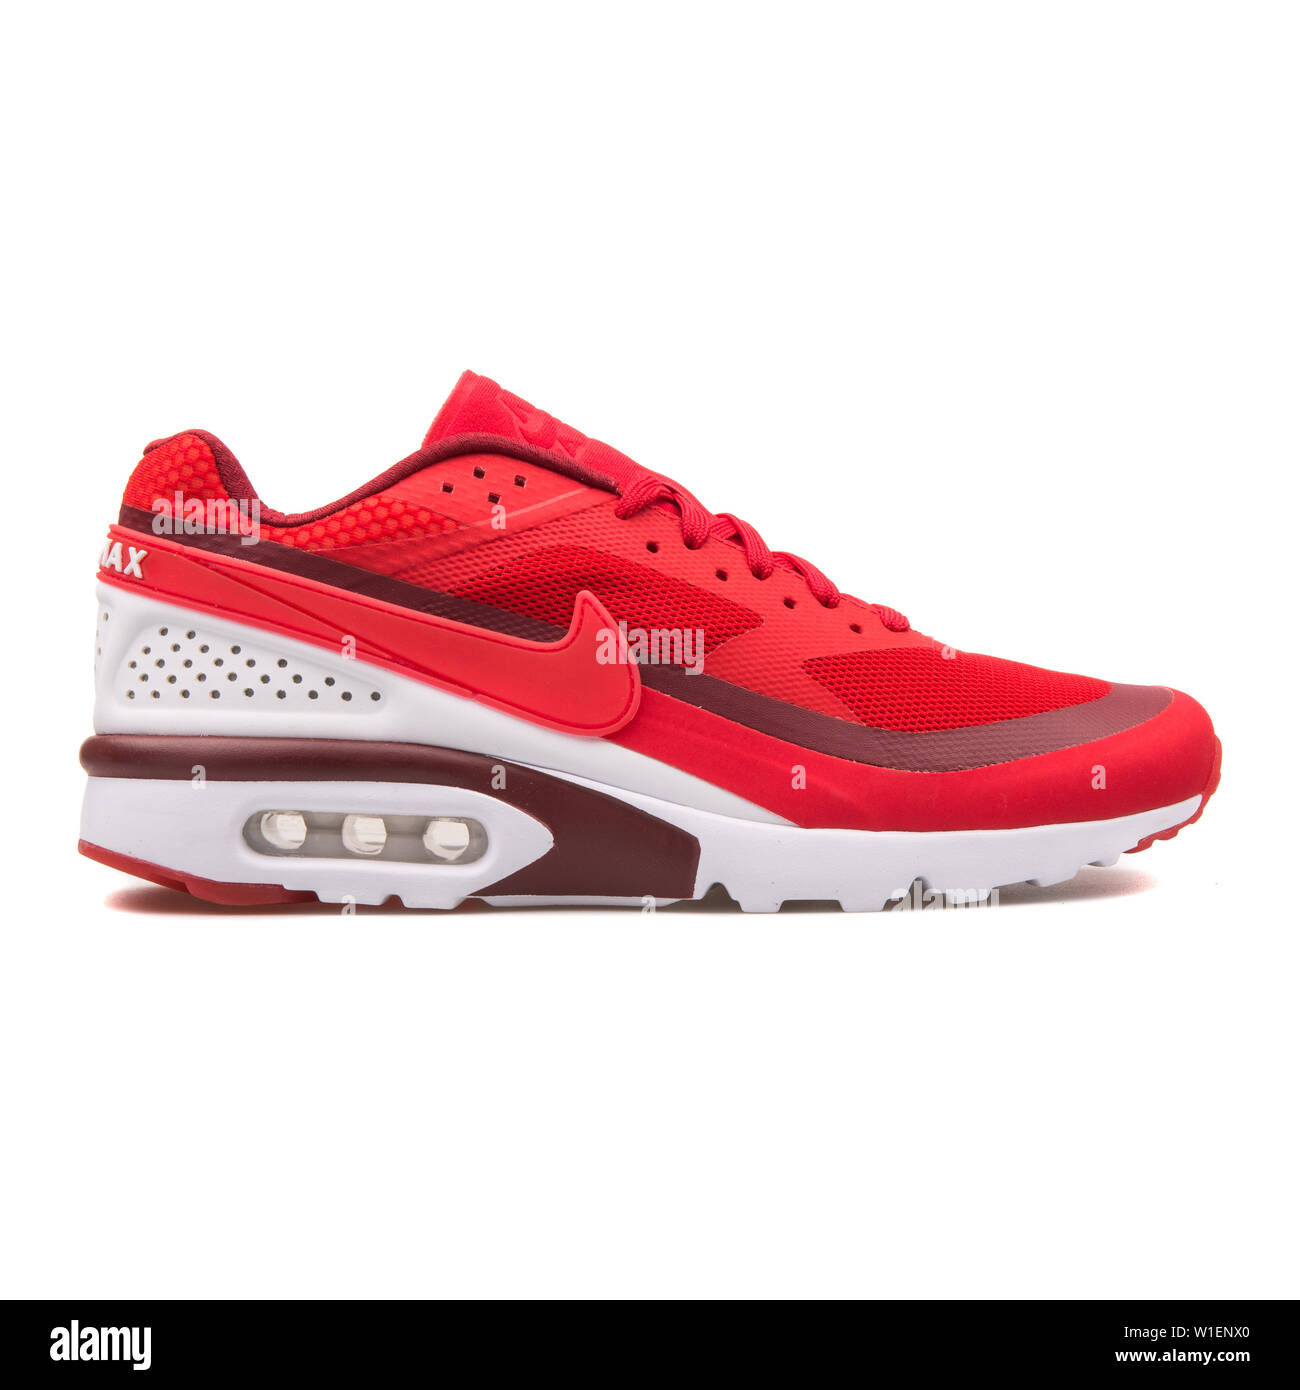 VIENNA, AUSTRIA - AUGUST 10, 2017: Nike Air Max BW Ultra red and white  sneaker on white background Stock Photo - Alamy